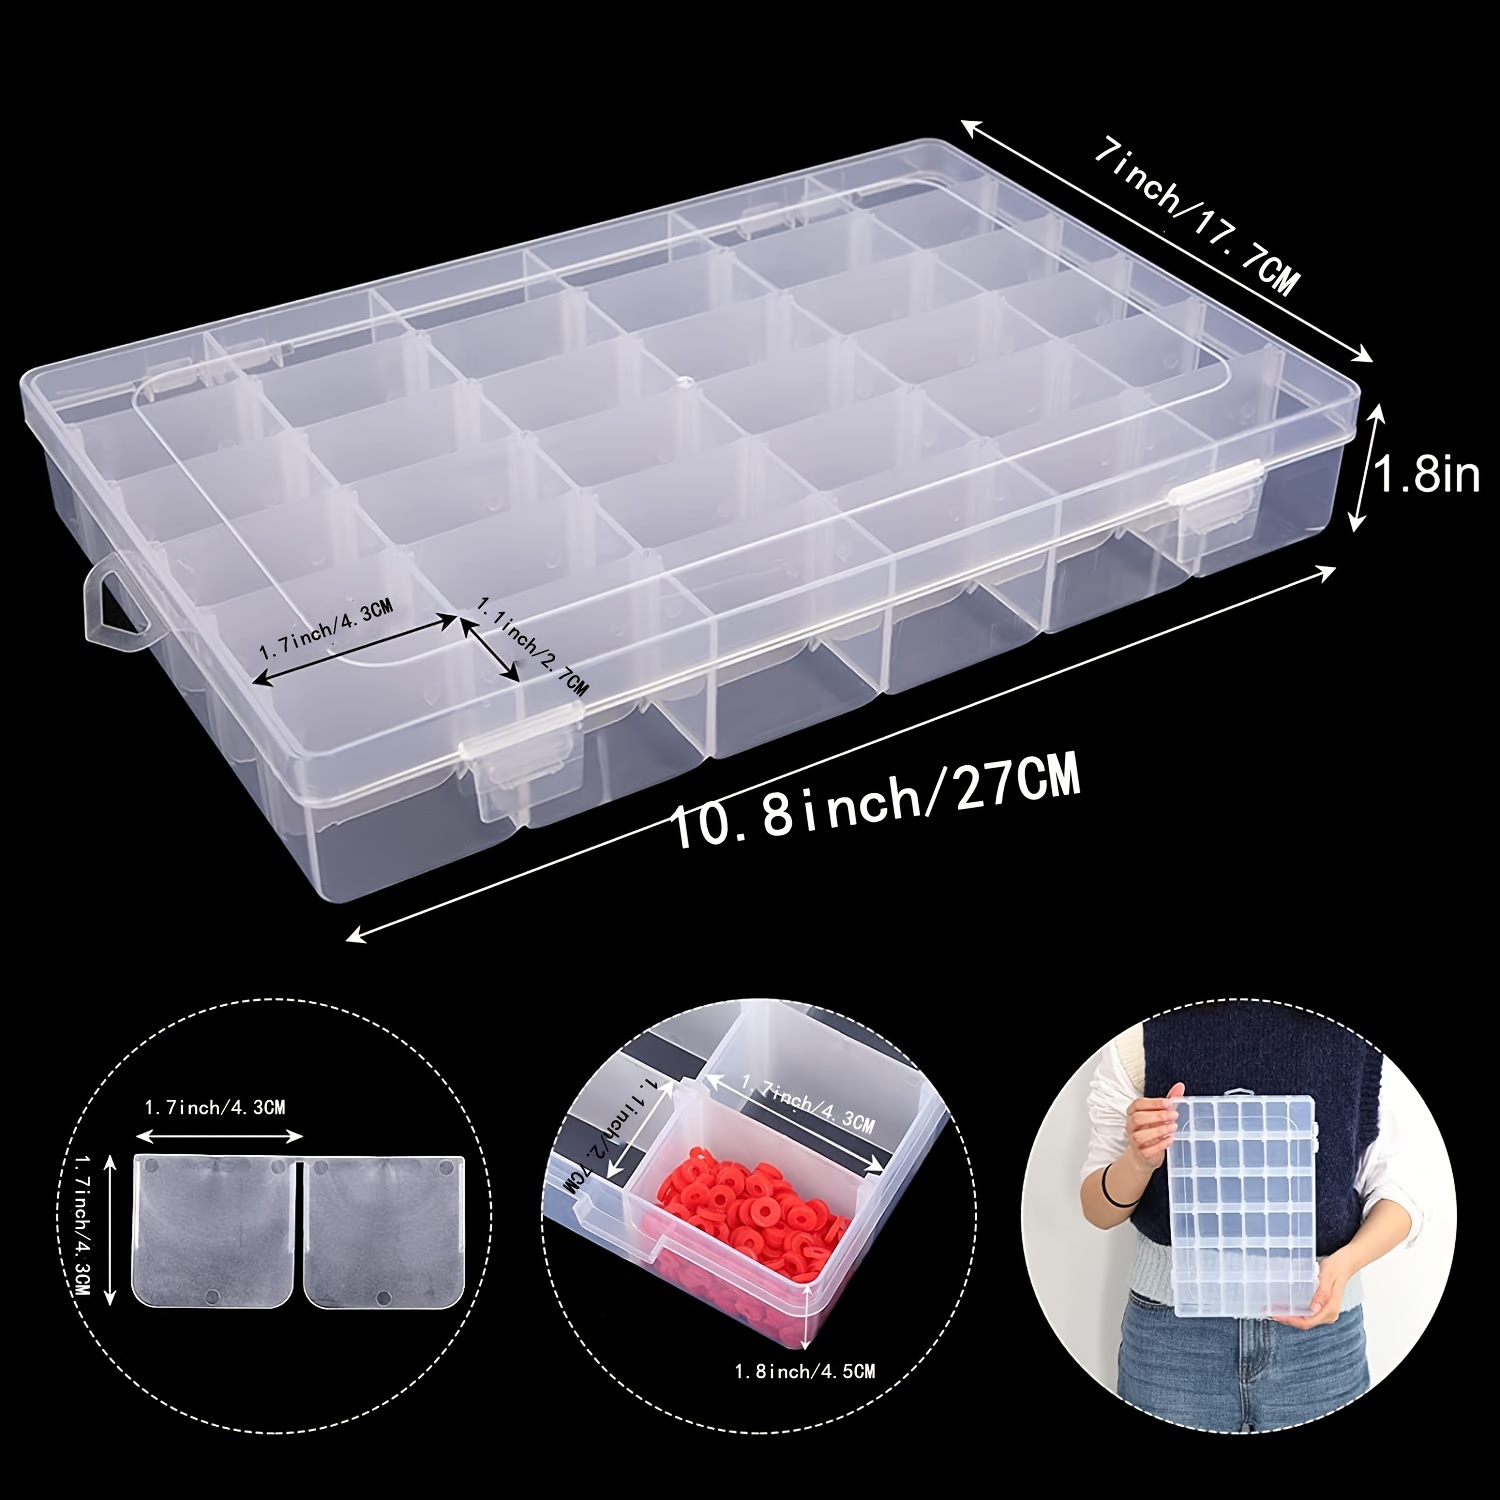 Outuxed 36 Grids Clear Plastic Organizer Box with Adjustable Compartment Dividers, Jewlery Storage Bead Organizer Rock Collection Box for Fishing